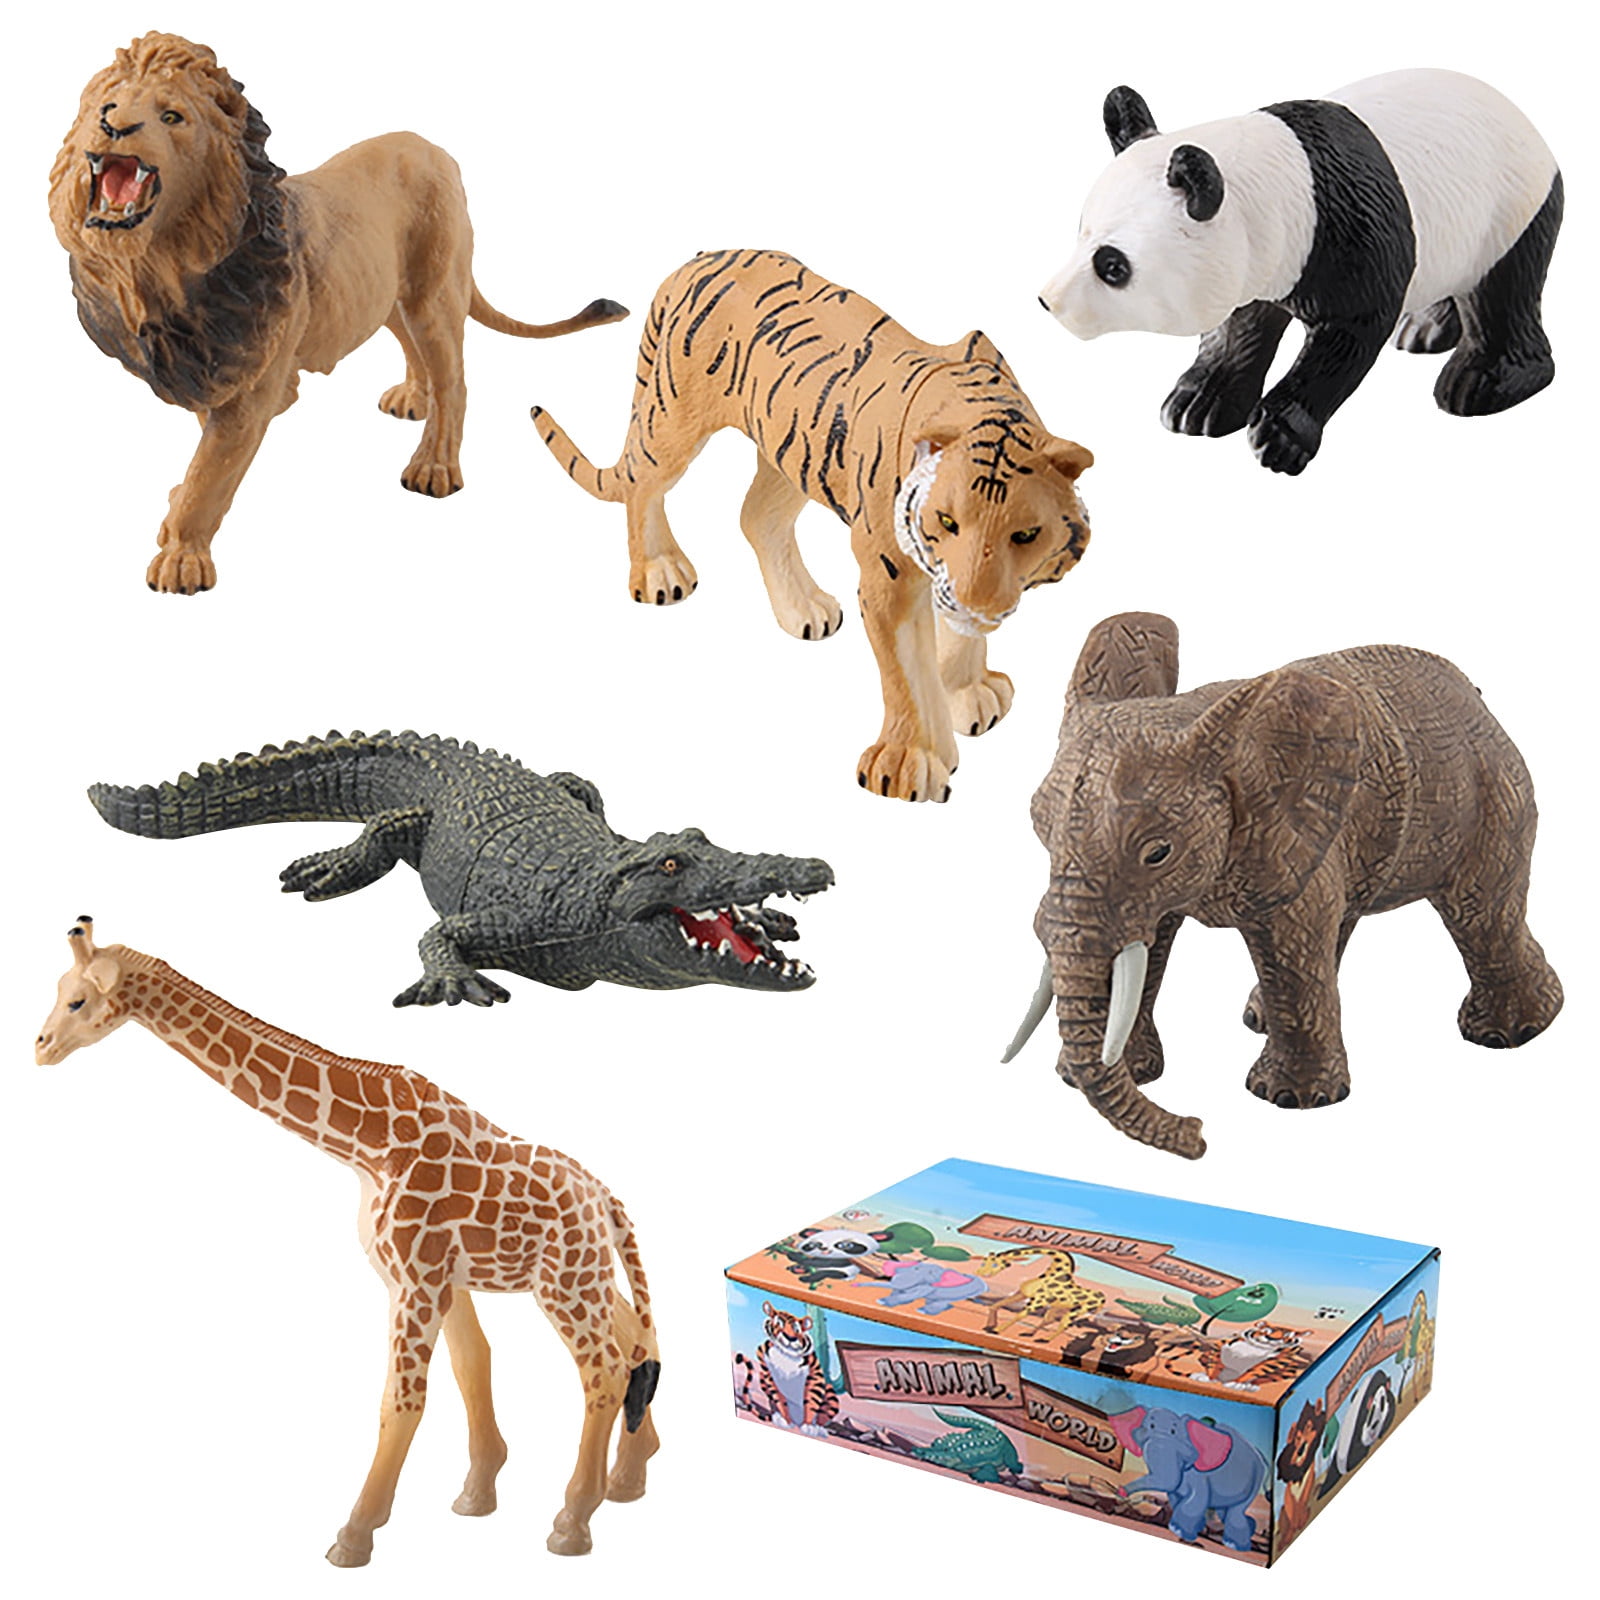 Animals Toys,Plastic Animals,Plastic Animals,Animal Toys Figurines Zoo Pack  for Kids Gift Preschool Educational 6 Animals Set A 